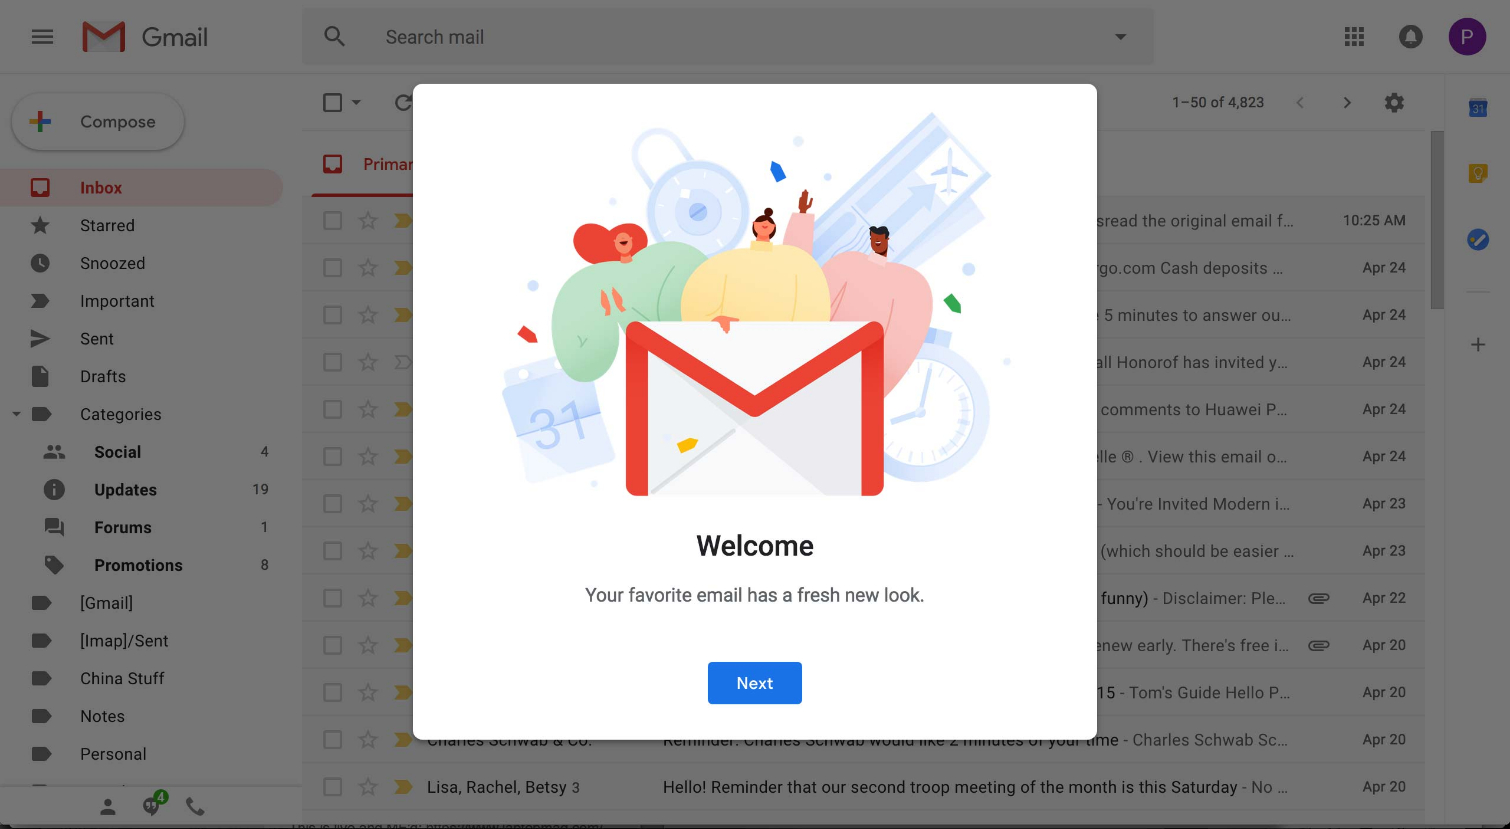 how to put gmail icon on desktop windows 7 in firefox